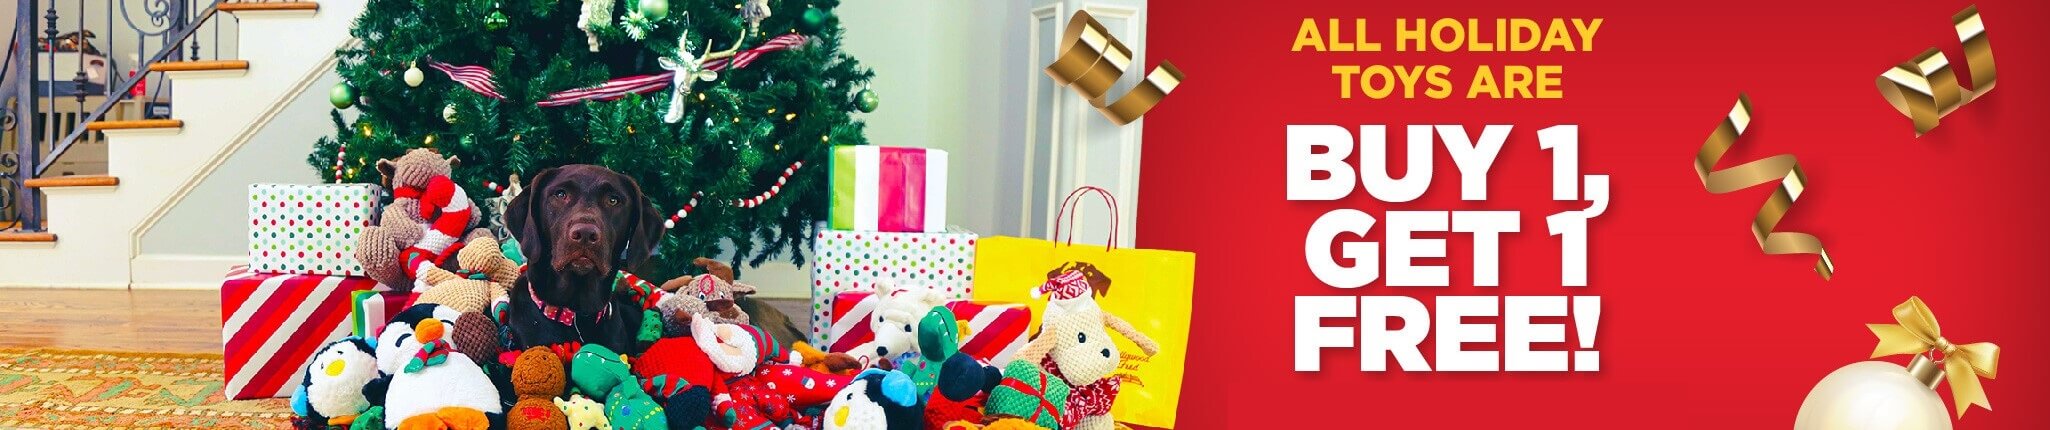 Buy 1, Get 1 Free All Holiday Toys